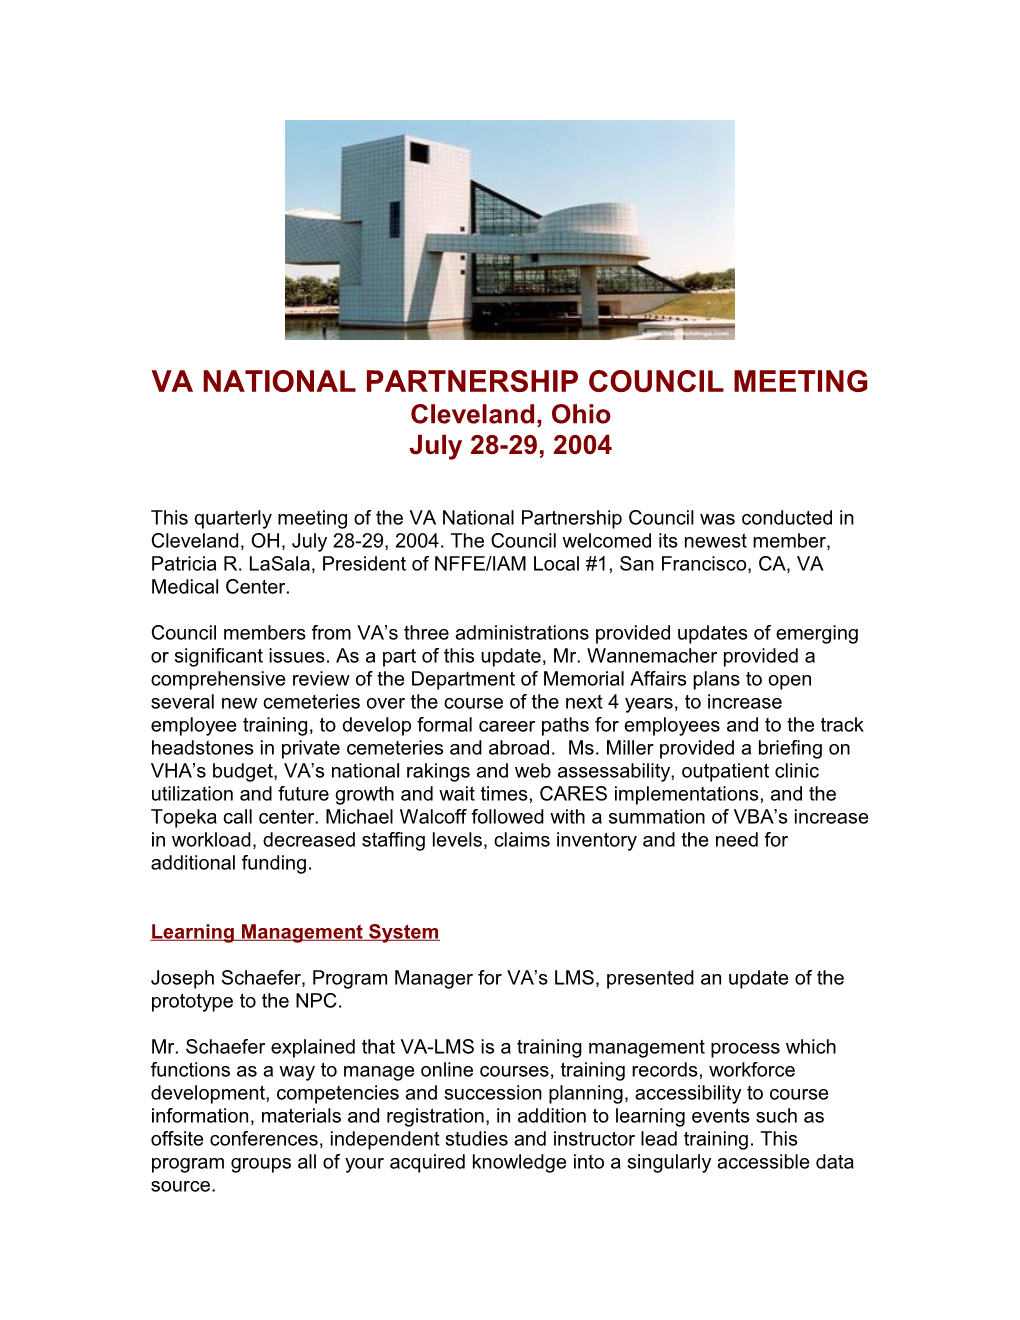 This Quarterly Meeting of the VA National Partnership Council Was Conducted in Cleveland